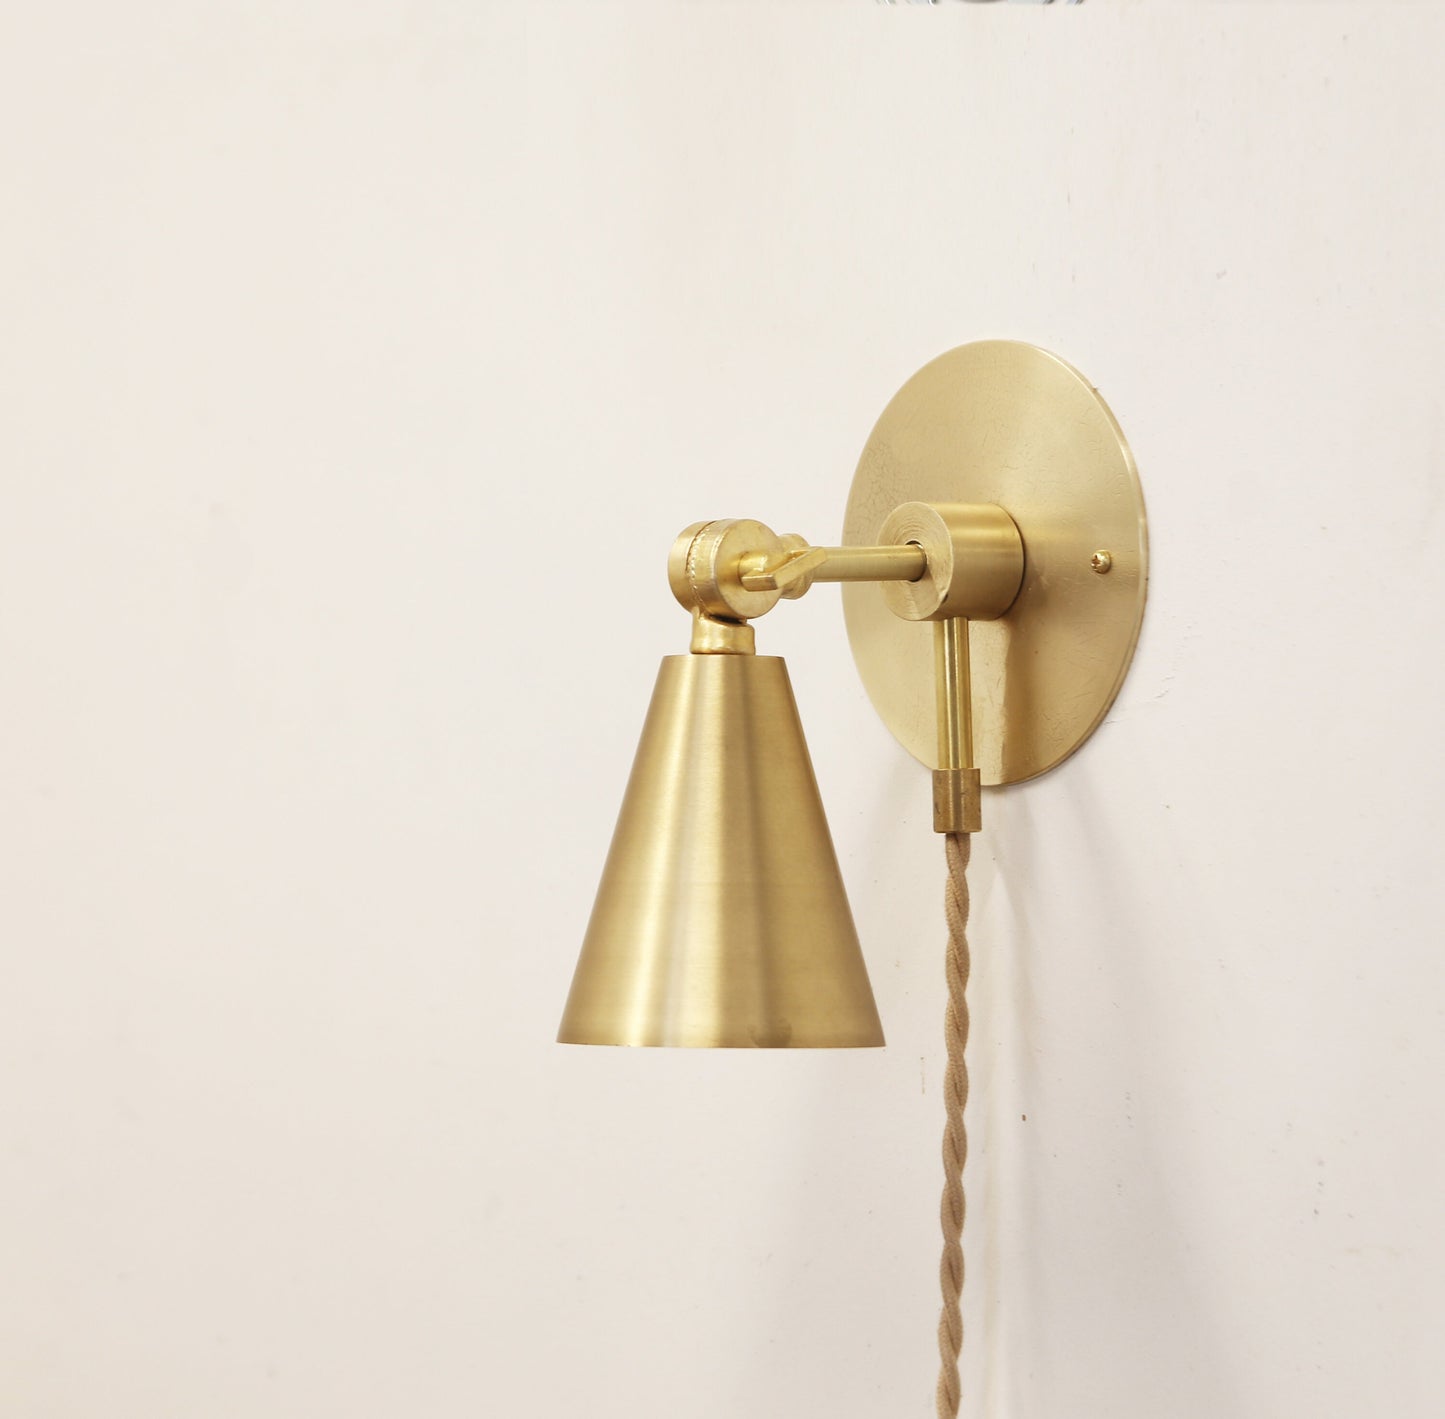 Pug-in Brass Wall Sconce  light with, Modern brass light,  Mid Century brass wall sconce light, Minimal Sconce Light